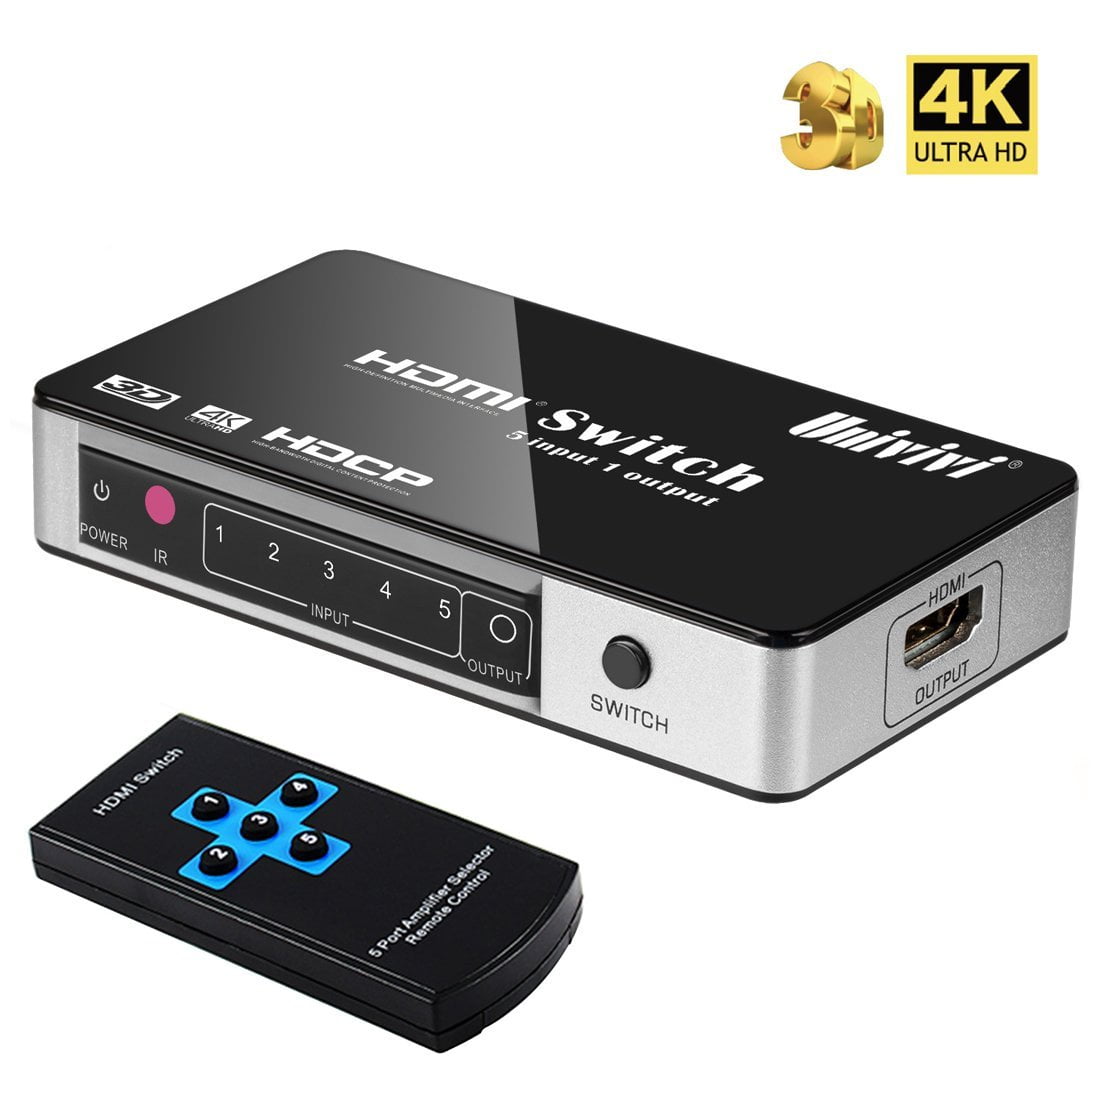 Univivi HDMI Switch 4K 5 Port 5x1 HDMI Switcher Splitter Box Support 4Kx2K  Ultra HD 3D With Remote Control and Power Adapter 